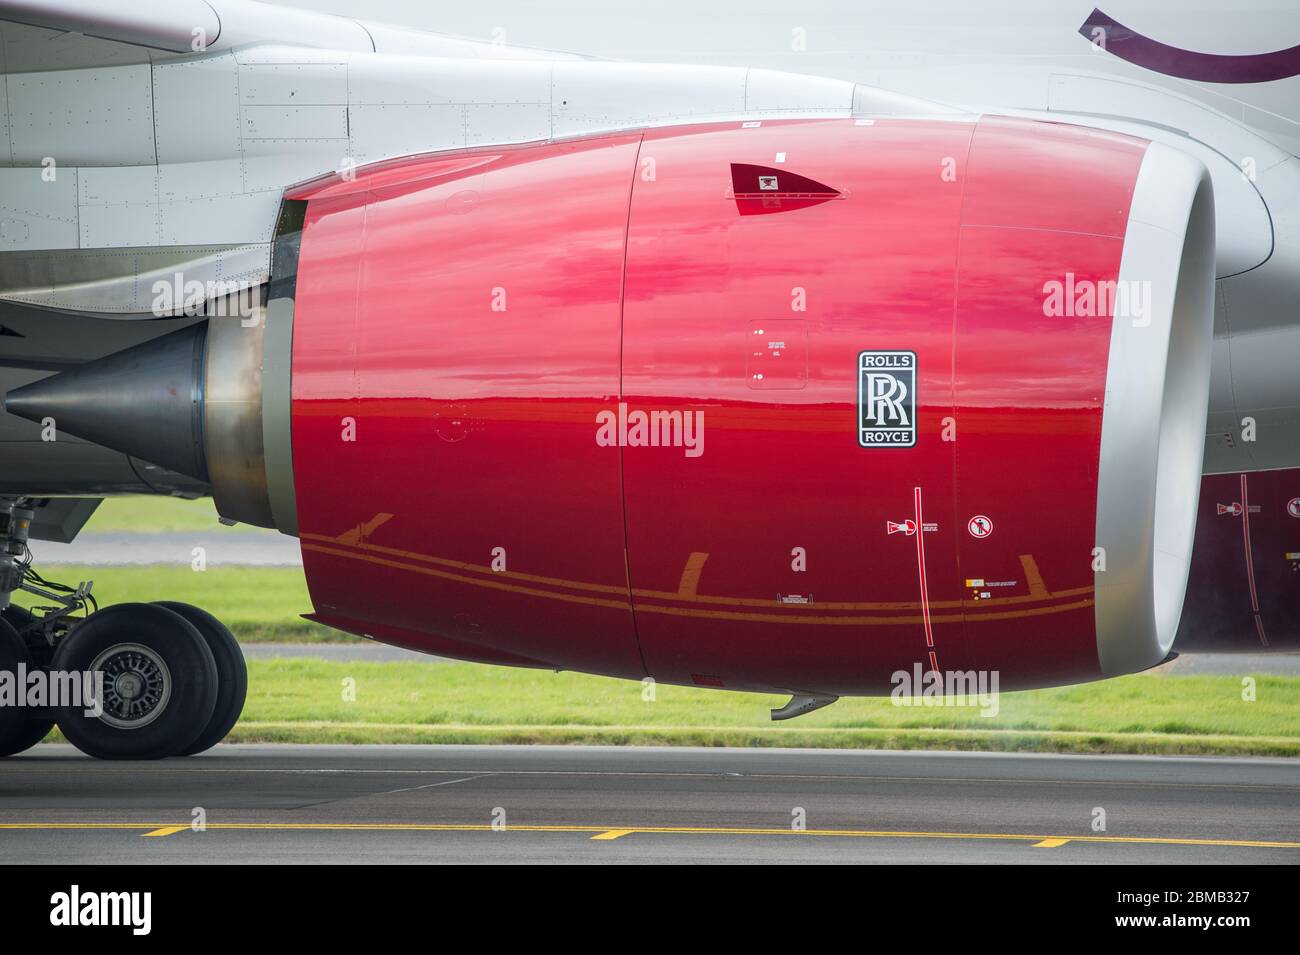 Glasgow, UK. 25 August 2019.  Pictured: Virgin Atlantic Airbus A350-1000 aircraft seen at Glasgow International Airport for pilot training. Virgin's brand new jumbo jet boasts an amazing new 'loft' social space with sofas in business class, and aptly adorned by the registration G-VLUX. The entire aircraft will also have access to high-speed Wi-Fi. Virgin Atlantic has ordered a total of 12 Airbus A350-1000s. They are all scheduled to join the fleet by 2021 in an order worth an estimated $4.4 billion (£3.36 billion). Credit: Colin Fisher/Alamy Live News. Stock Photo